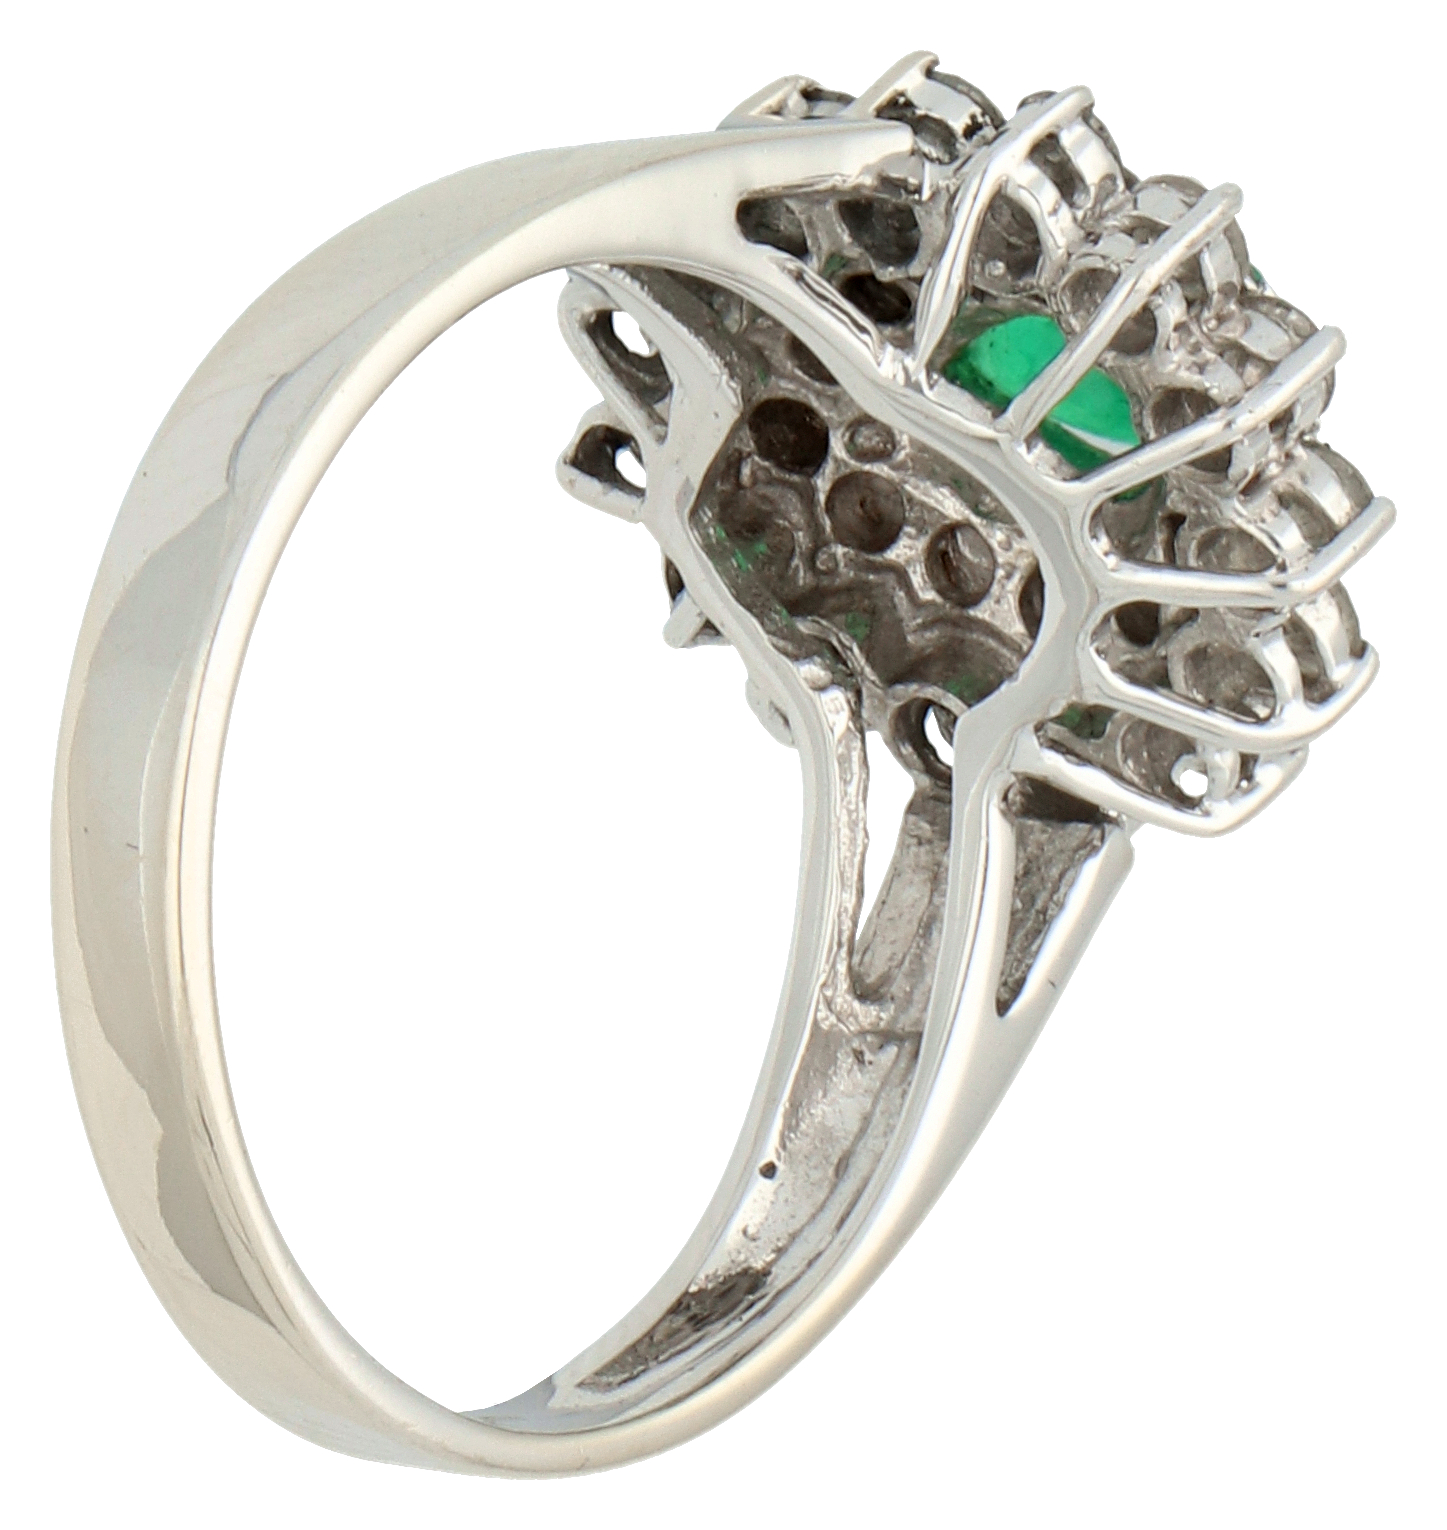 No Reserve - 18K White gold entourage ring set with approx. 0.42 ct. emerald and diamonds - Image 2 of 4